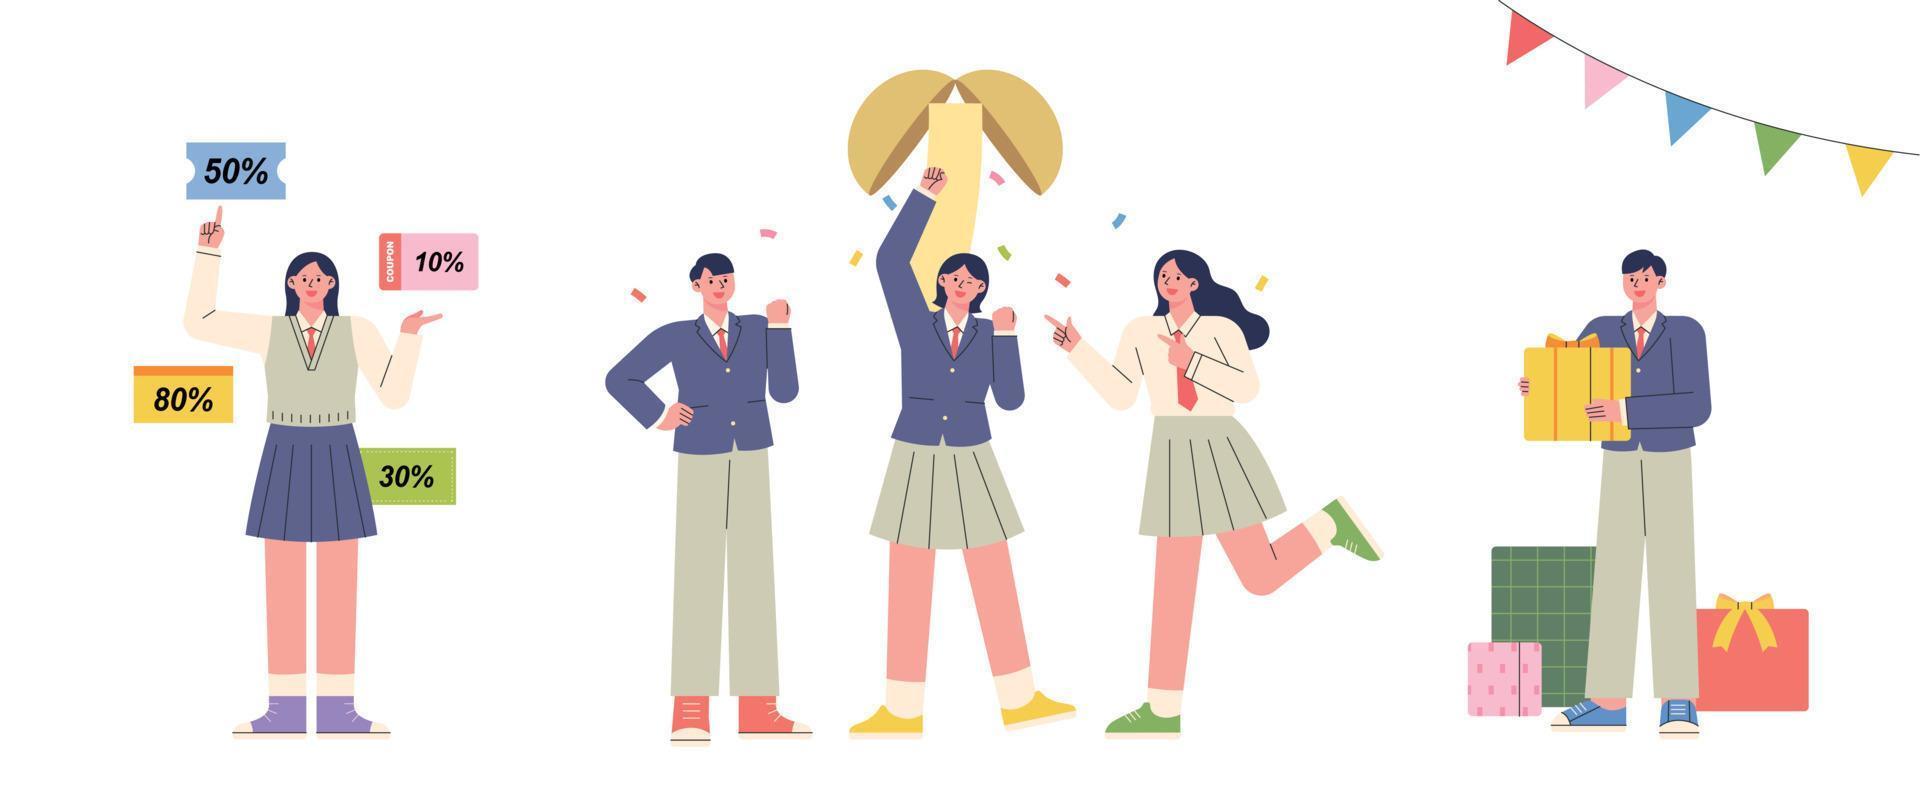 Students in school uniforms enjoy the event after college exams. vector